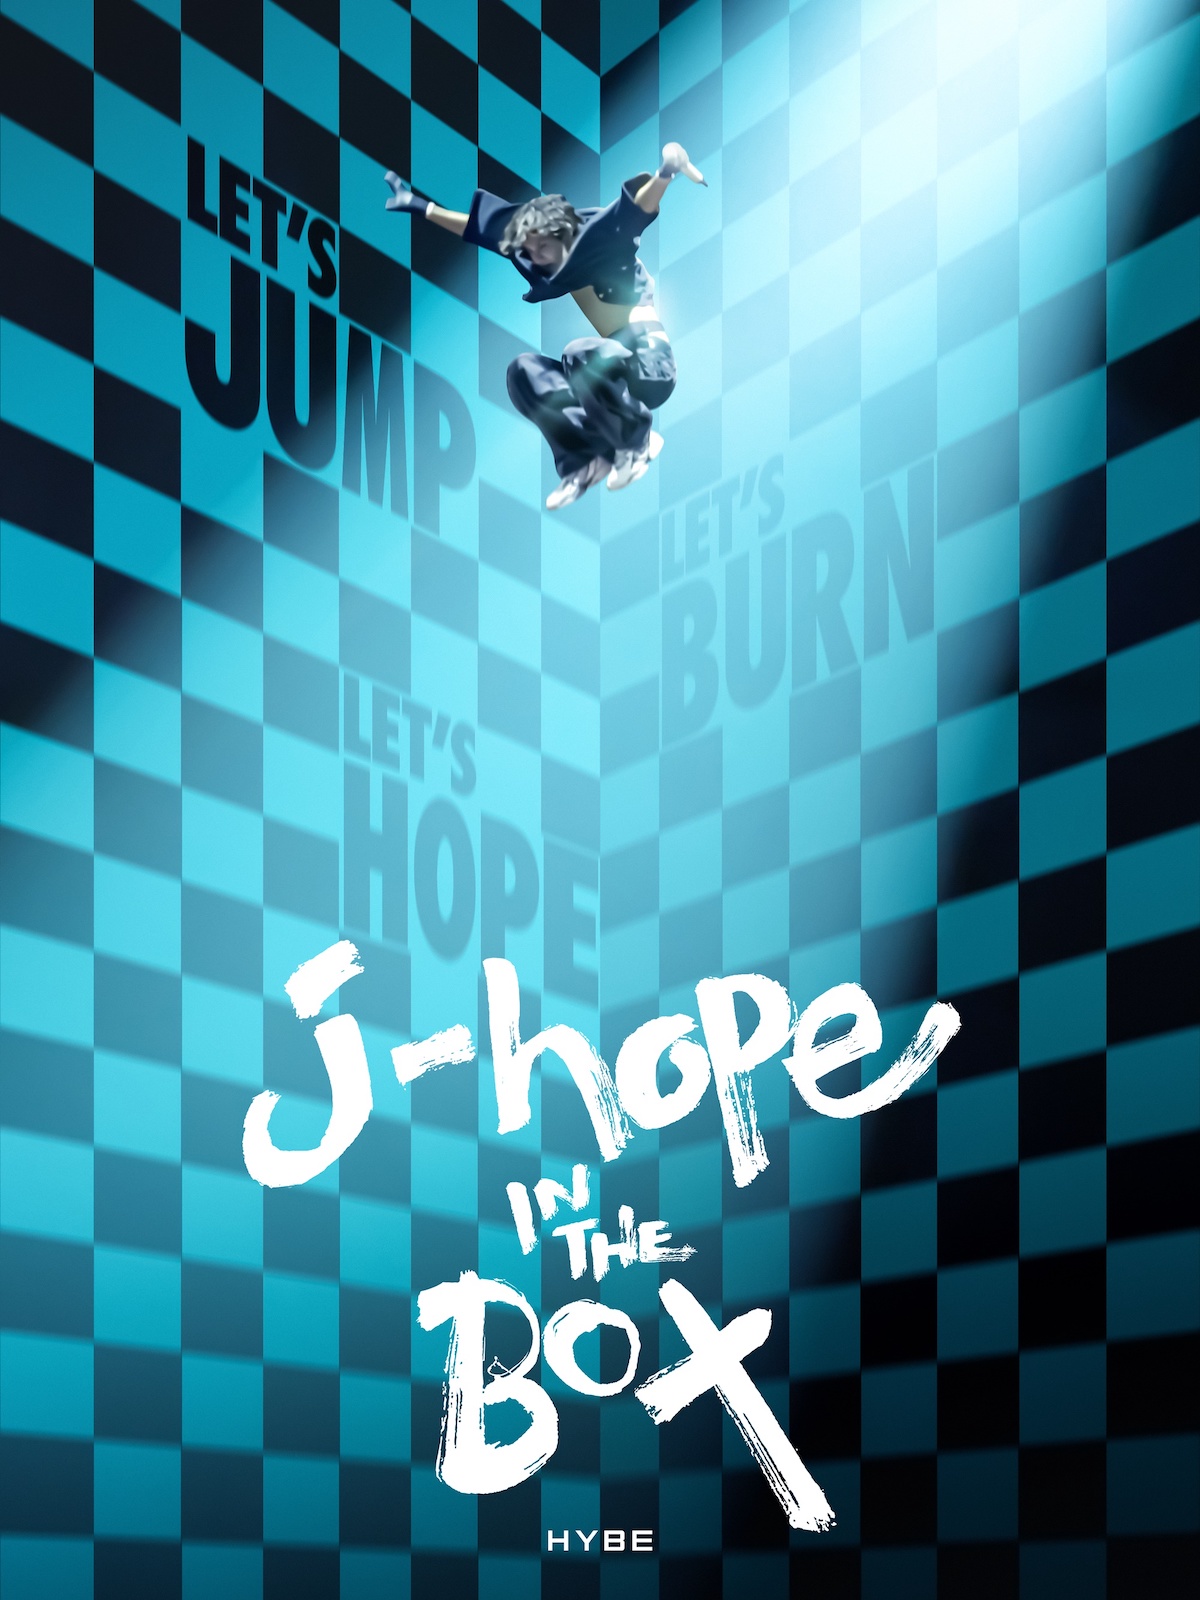 「j-hope IN THE BOX」を